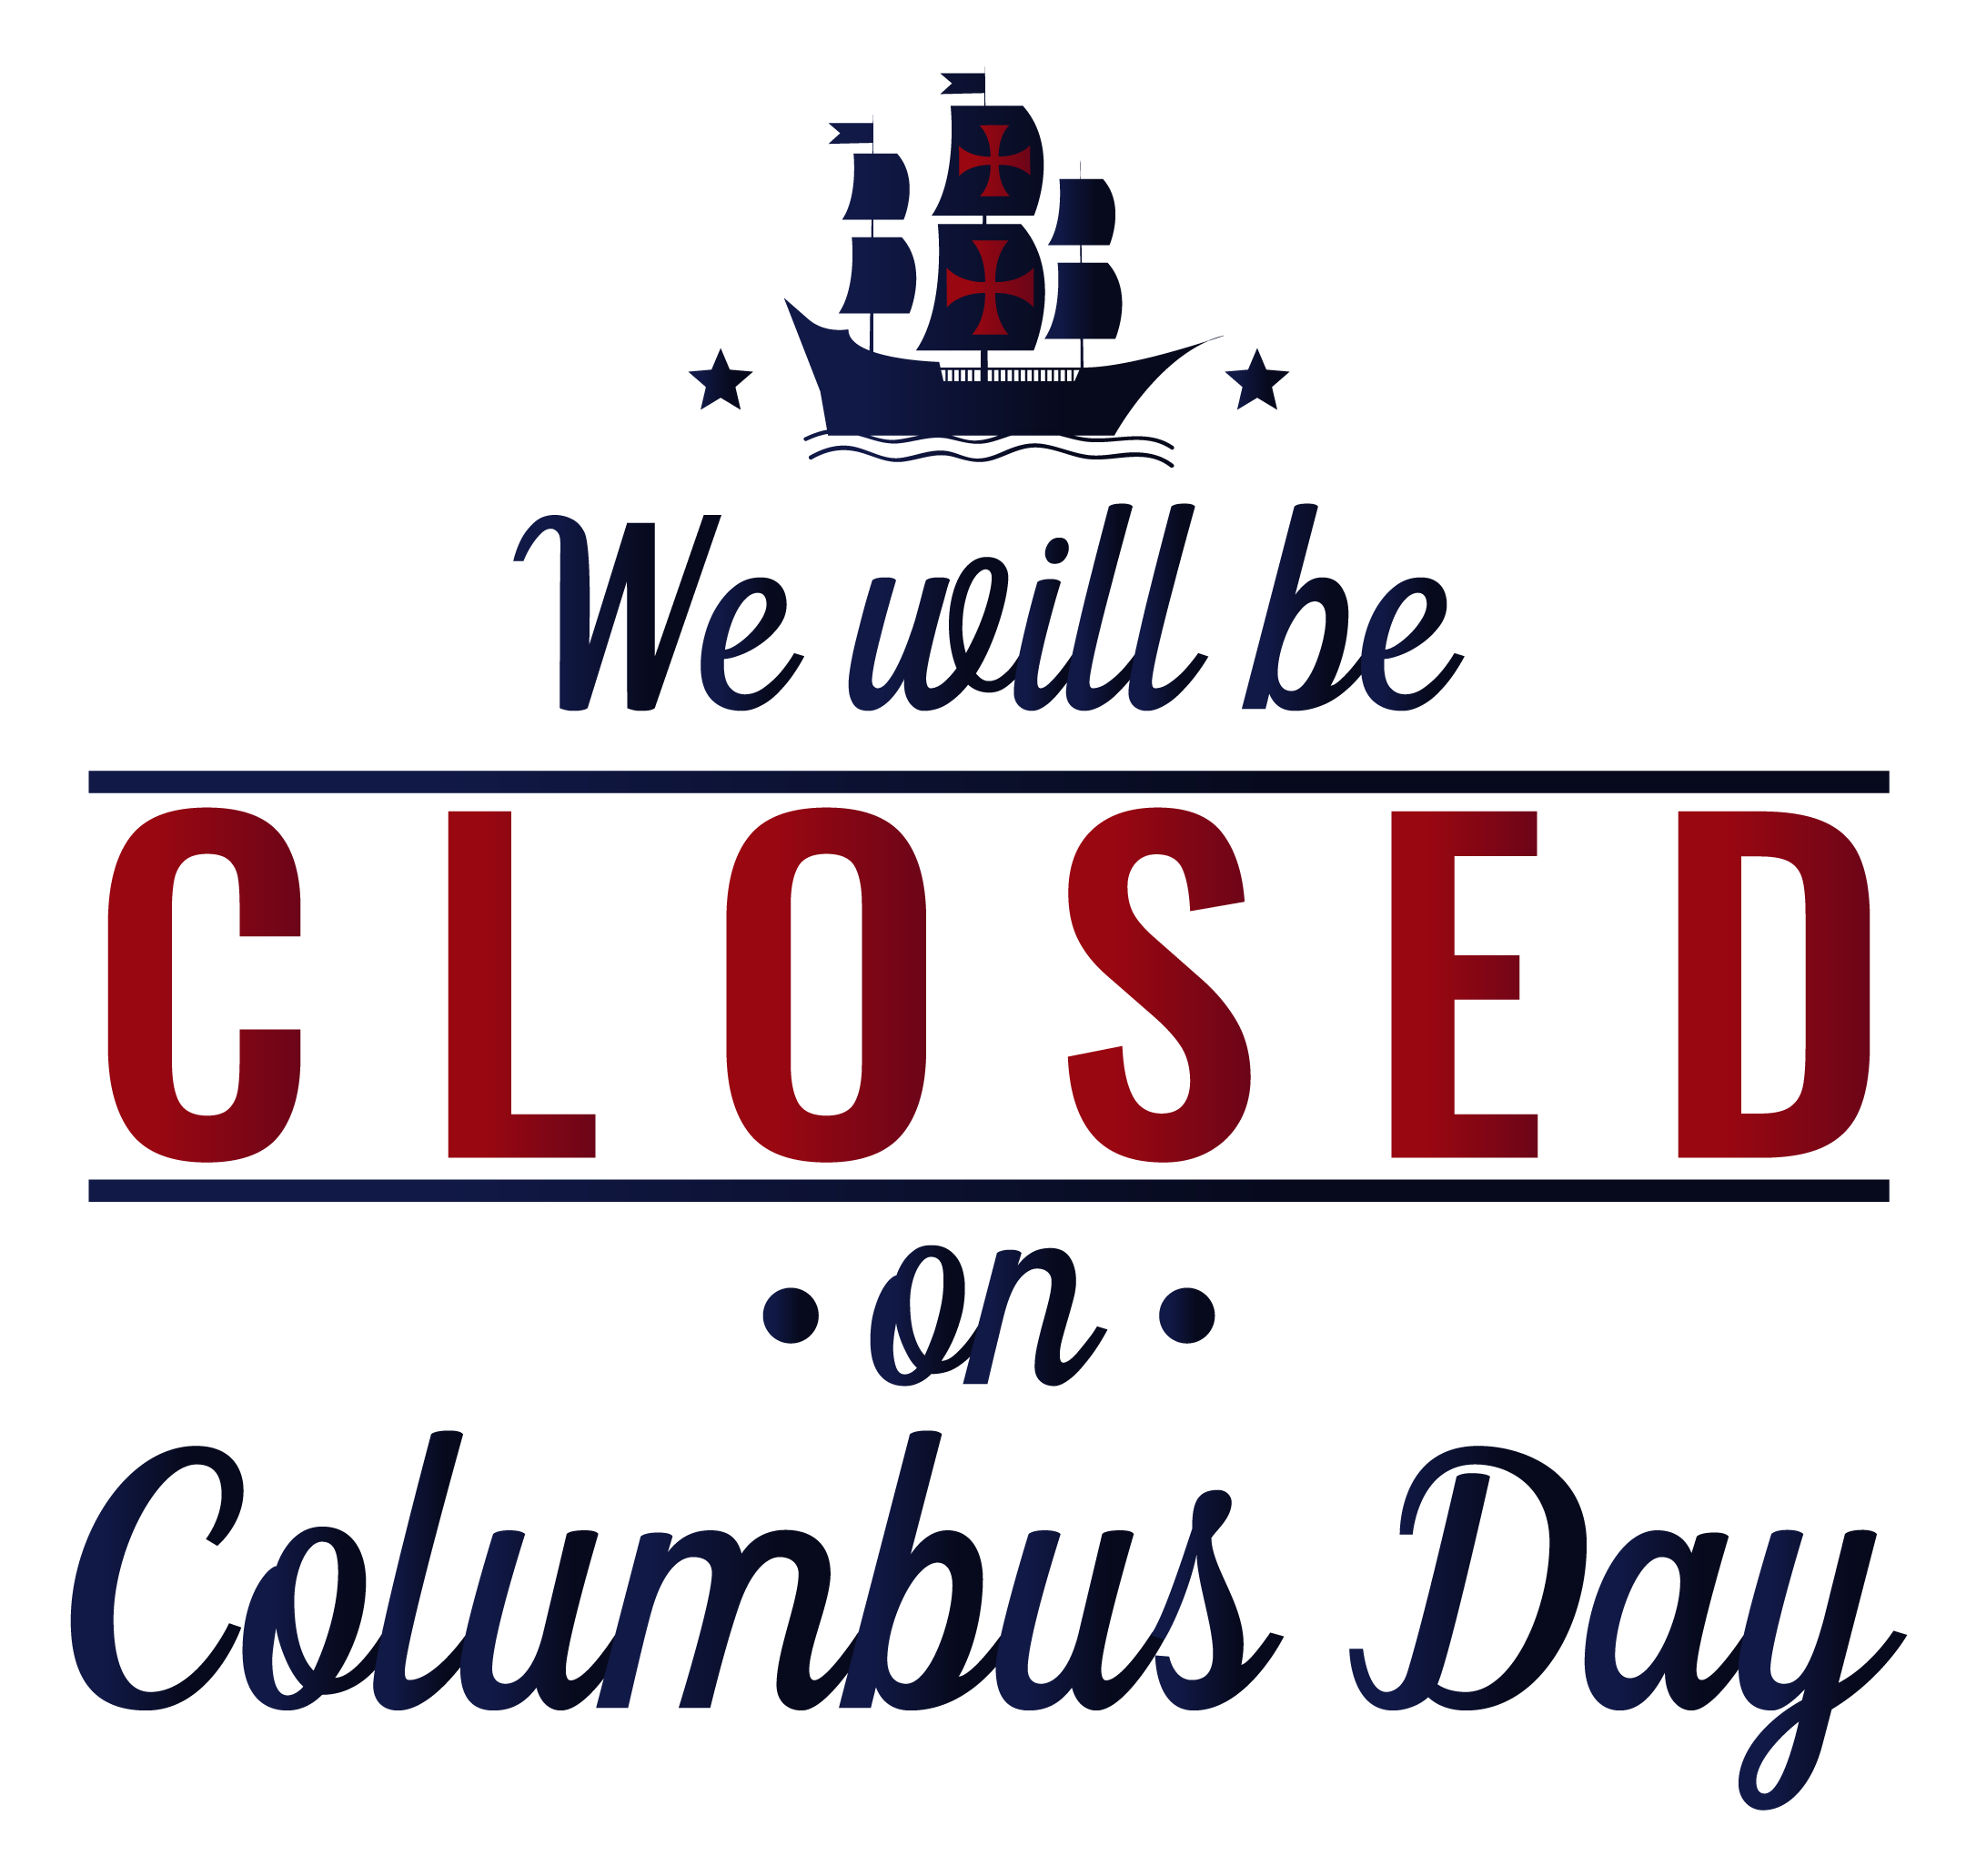 We will be closed on Columbus Day